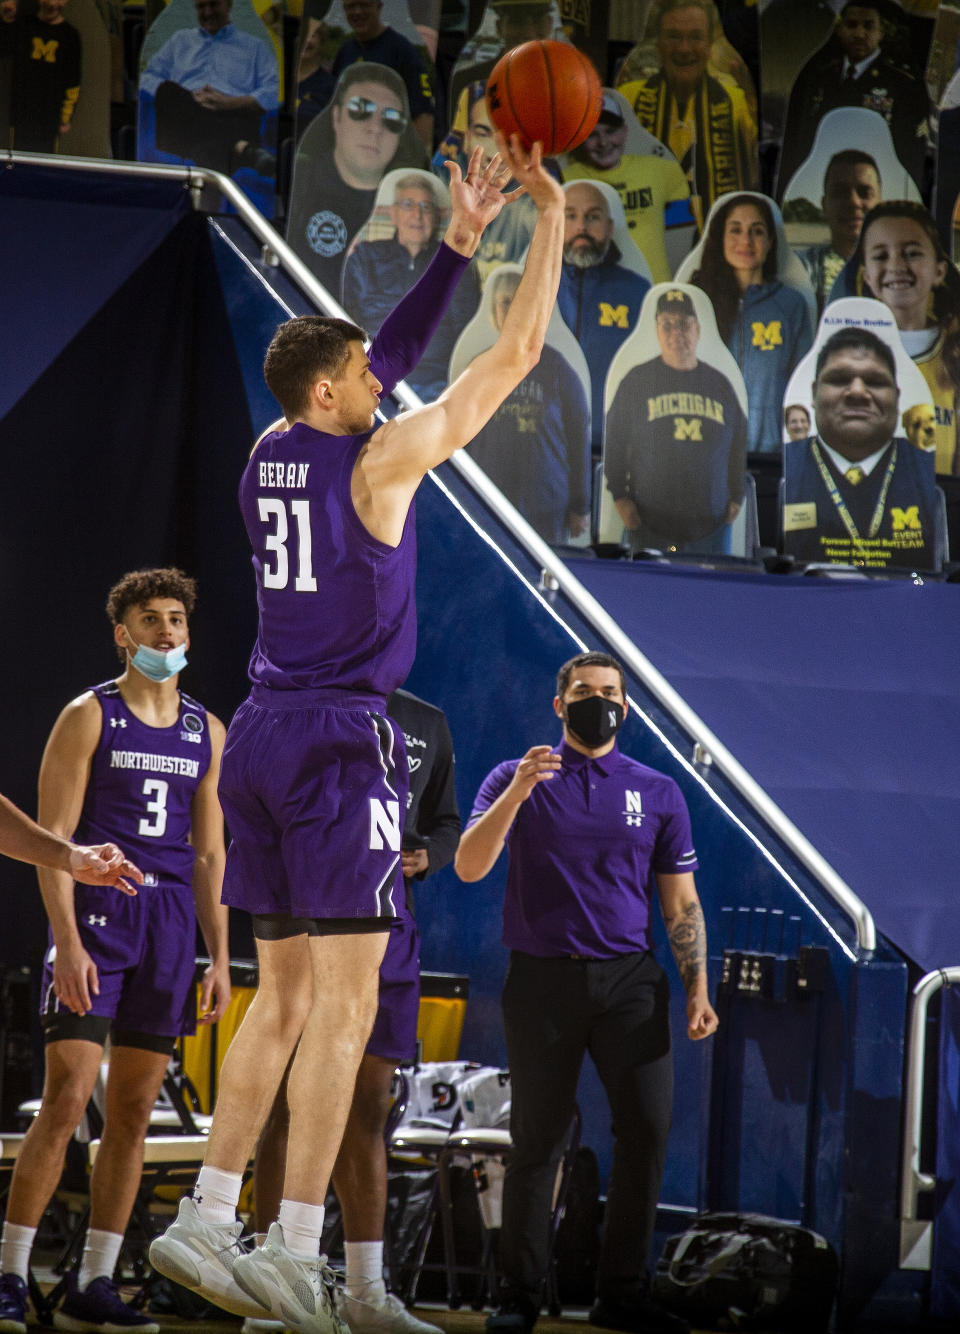 Northwestern forward Robbie Beran (31) attempts a three-point basket in the second half of an NCAA college basketball game against Michigan at Crisler Center in Ann Arbor, Mich., Sunday, Jan. 3, 2021. (AP Photo/Tony Ding)